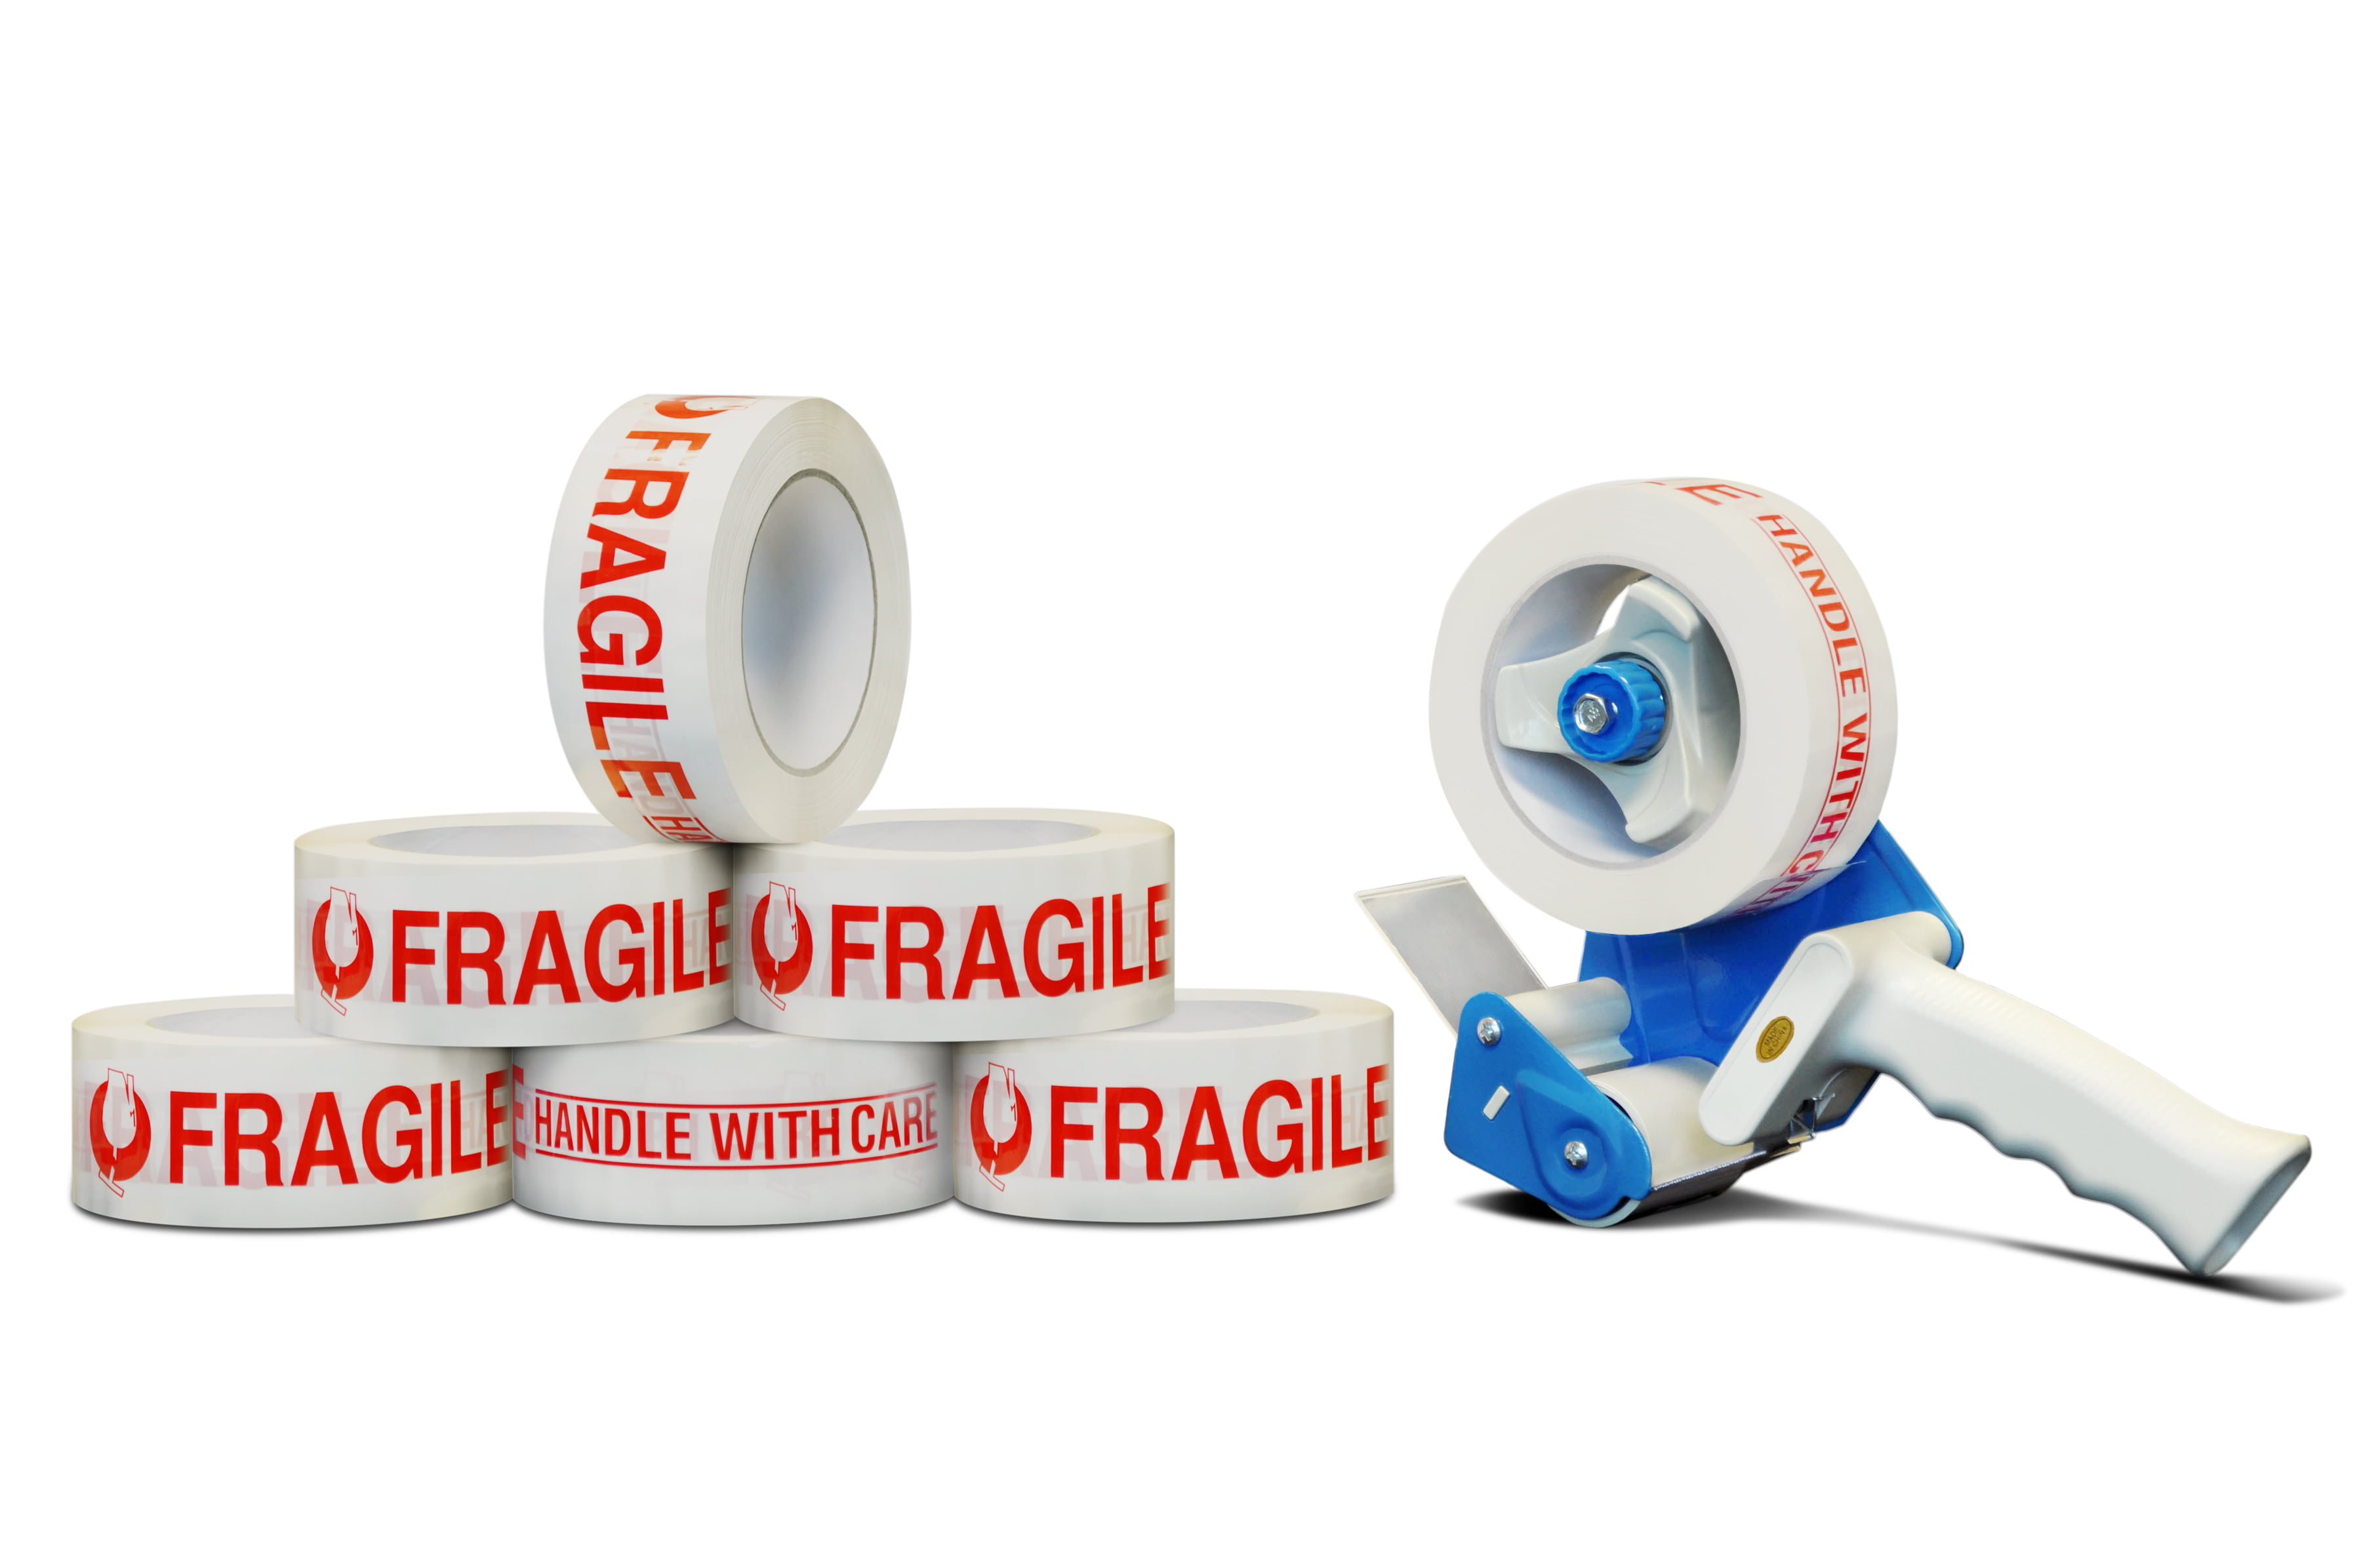 3" FRAGILE HANDLE WITH CARE Box Sealing Packing Tape 110 yards 2 Mil 1 Roll 